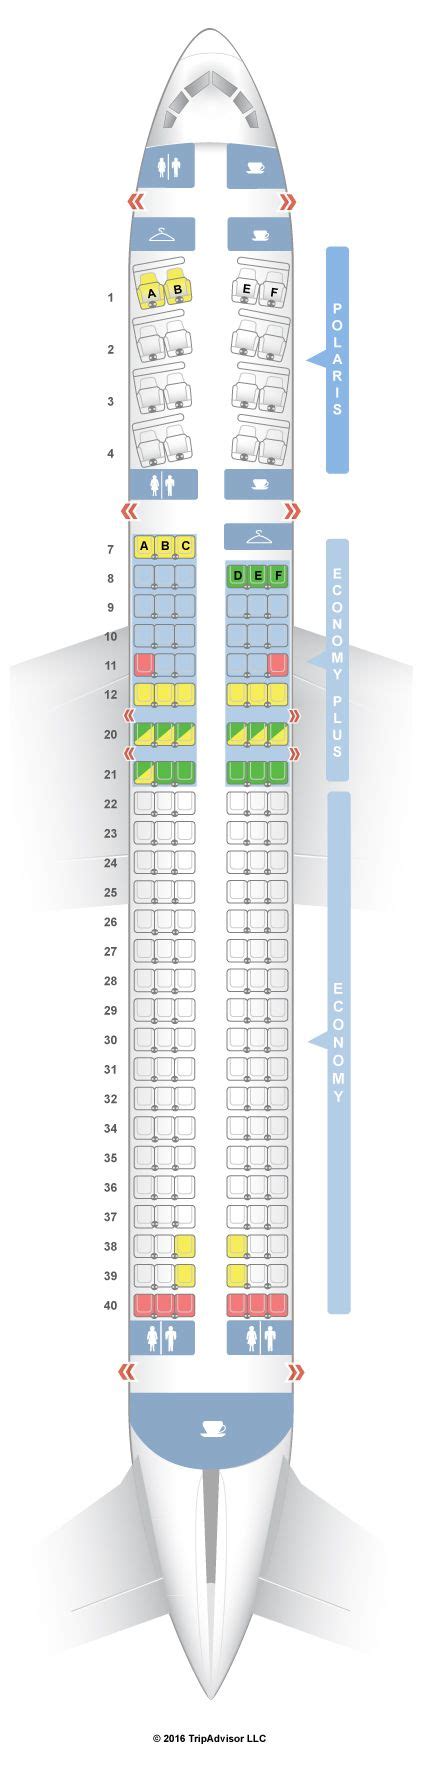 boeing 757 62 place seating chart